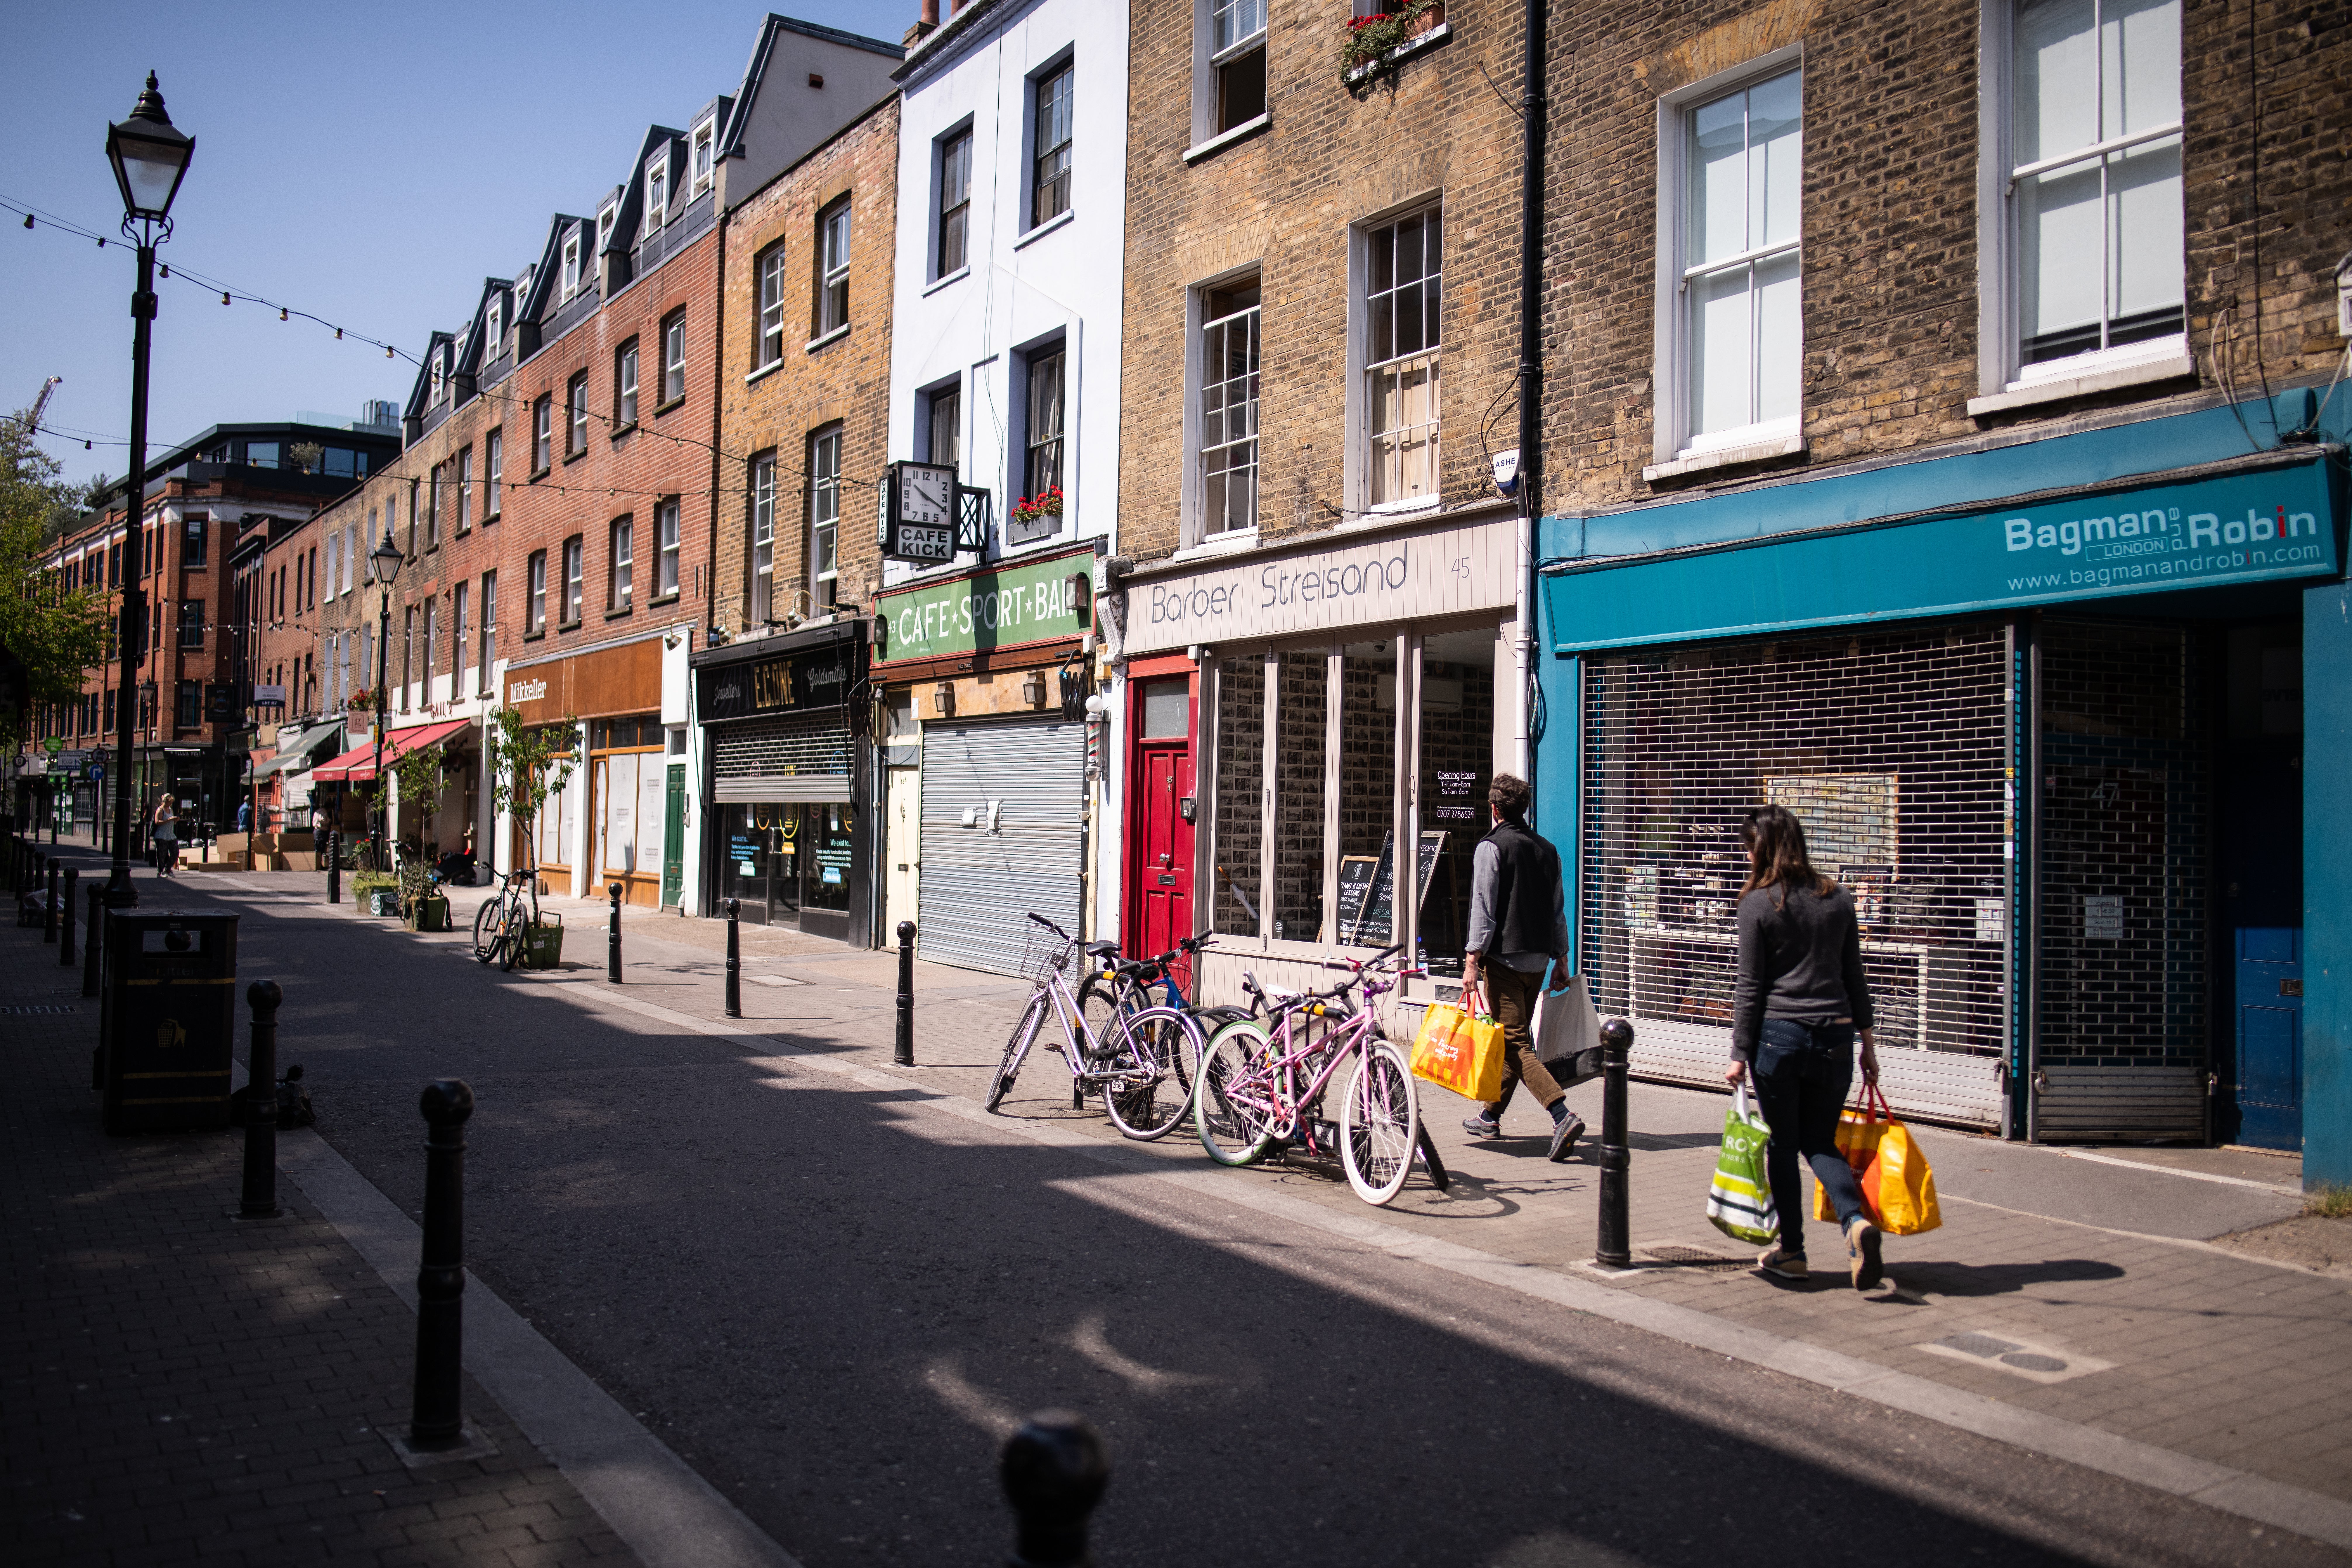 A man and woman carry their shopping down the usually busy Exmouth Market in London